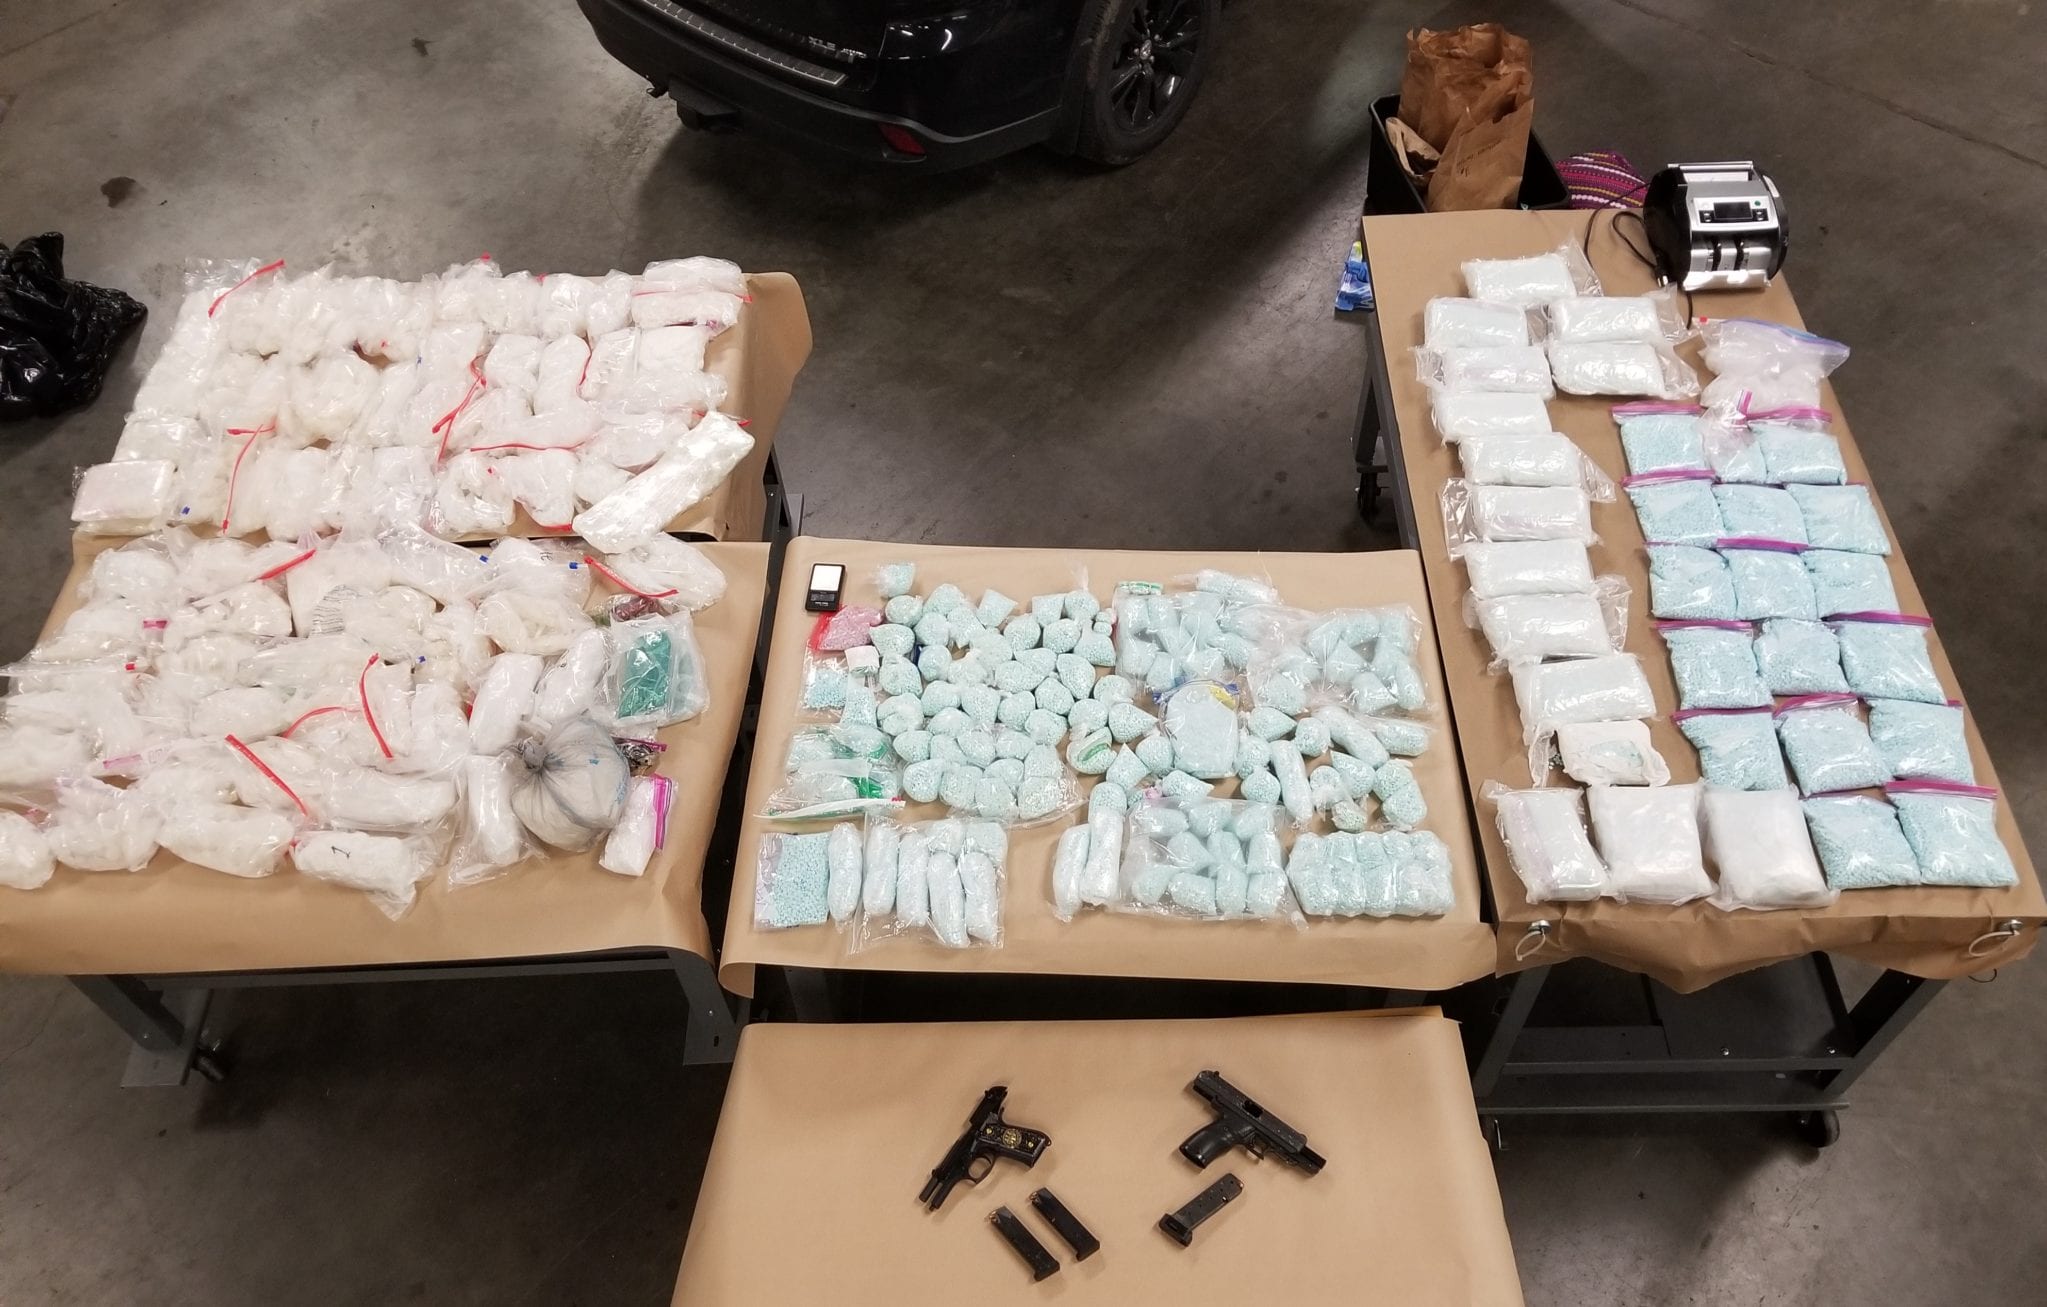 Seizures of illegal drug Fentanyl rose in Seattle by 187 percent, federal  officials say